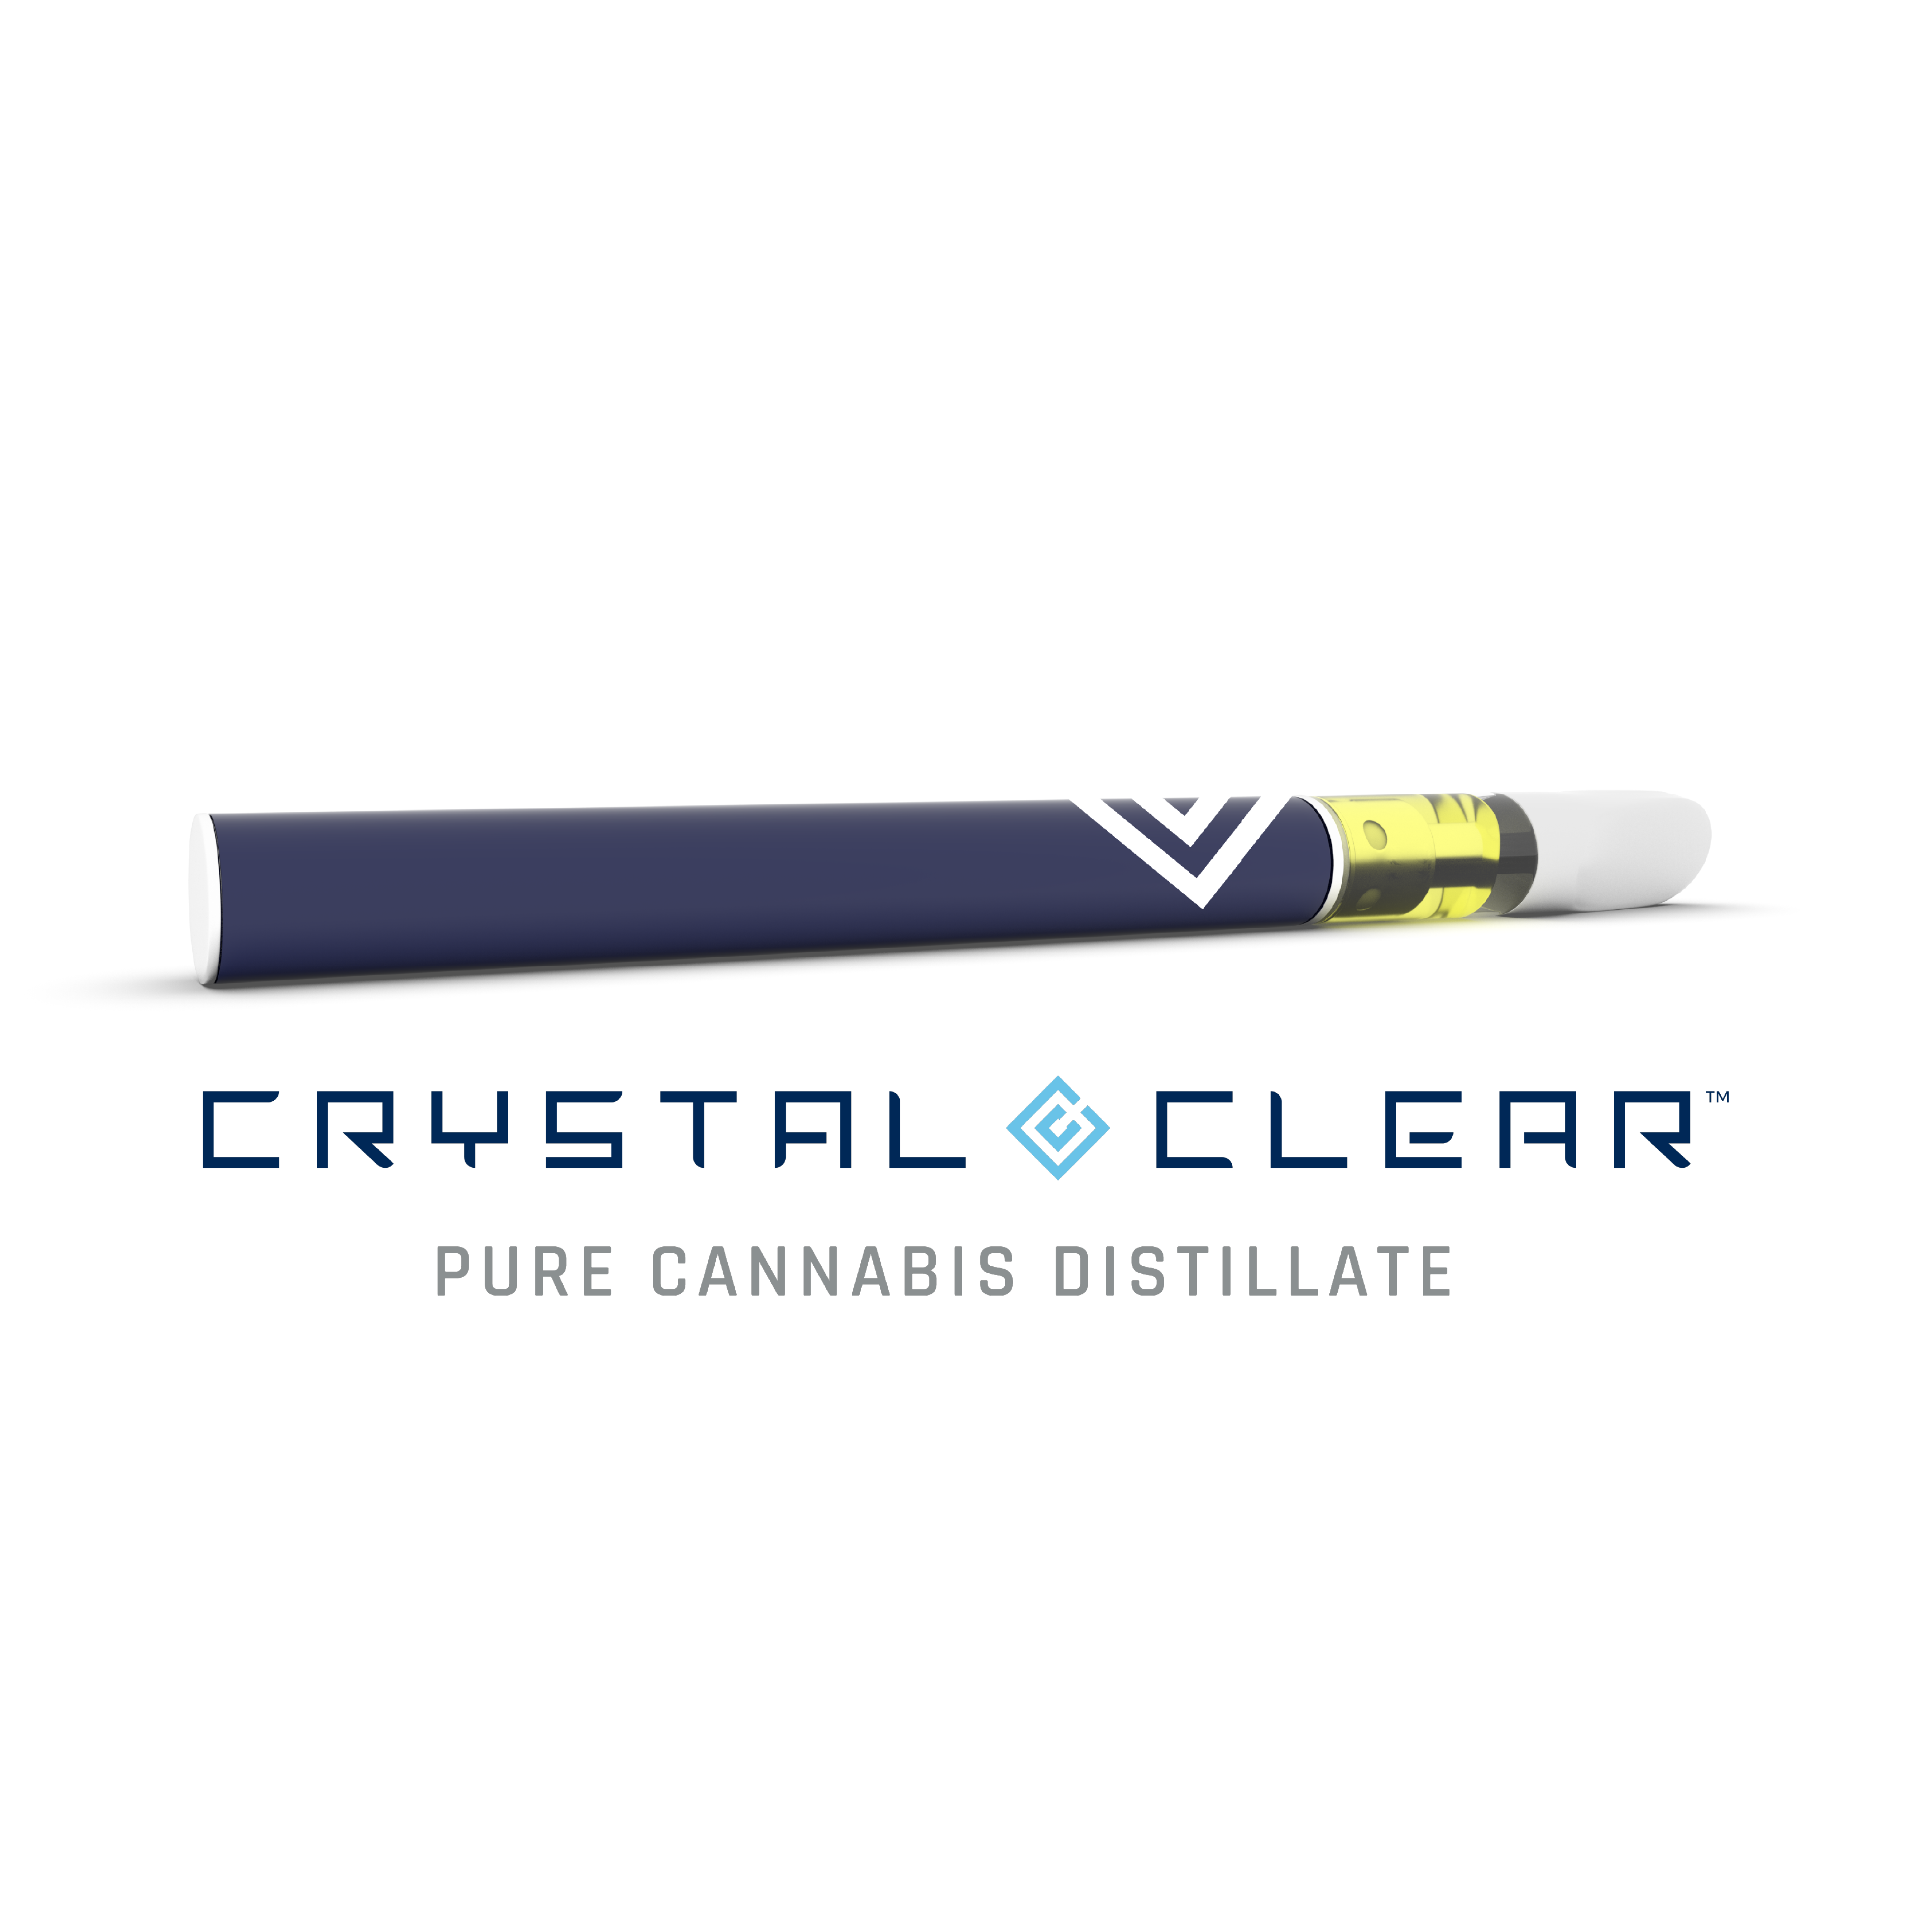 https://leafly-public.s3-us-west-2.amazonaws.com/products/photos/Ase4y4srSX6pJZ3LEi8n_Crystal_Clear_Leafly_Vape_Pen.png